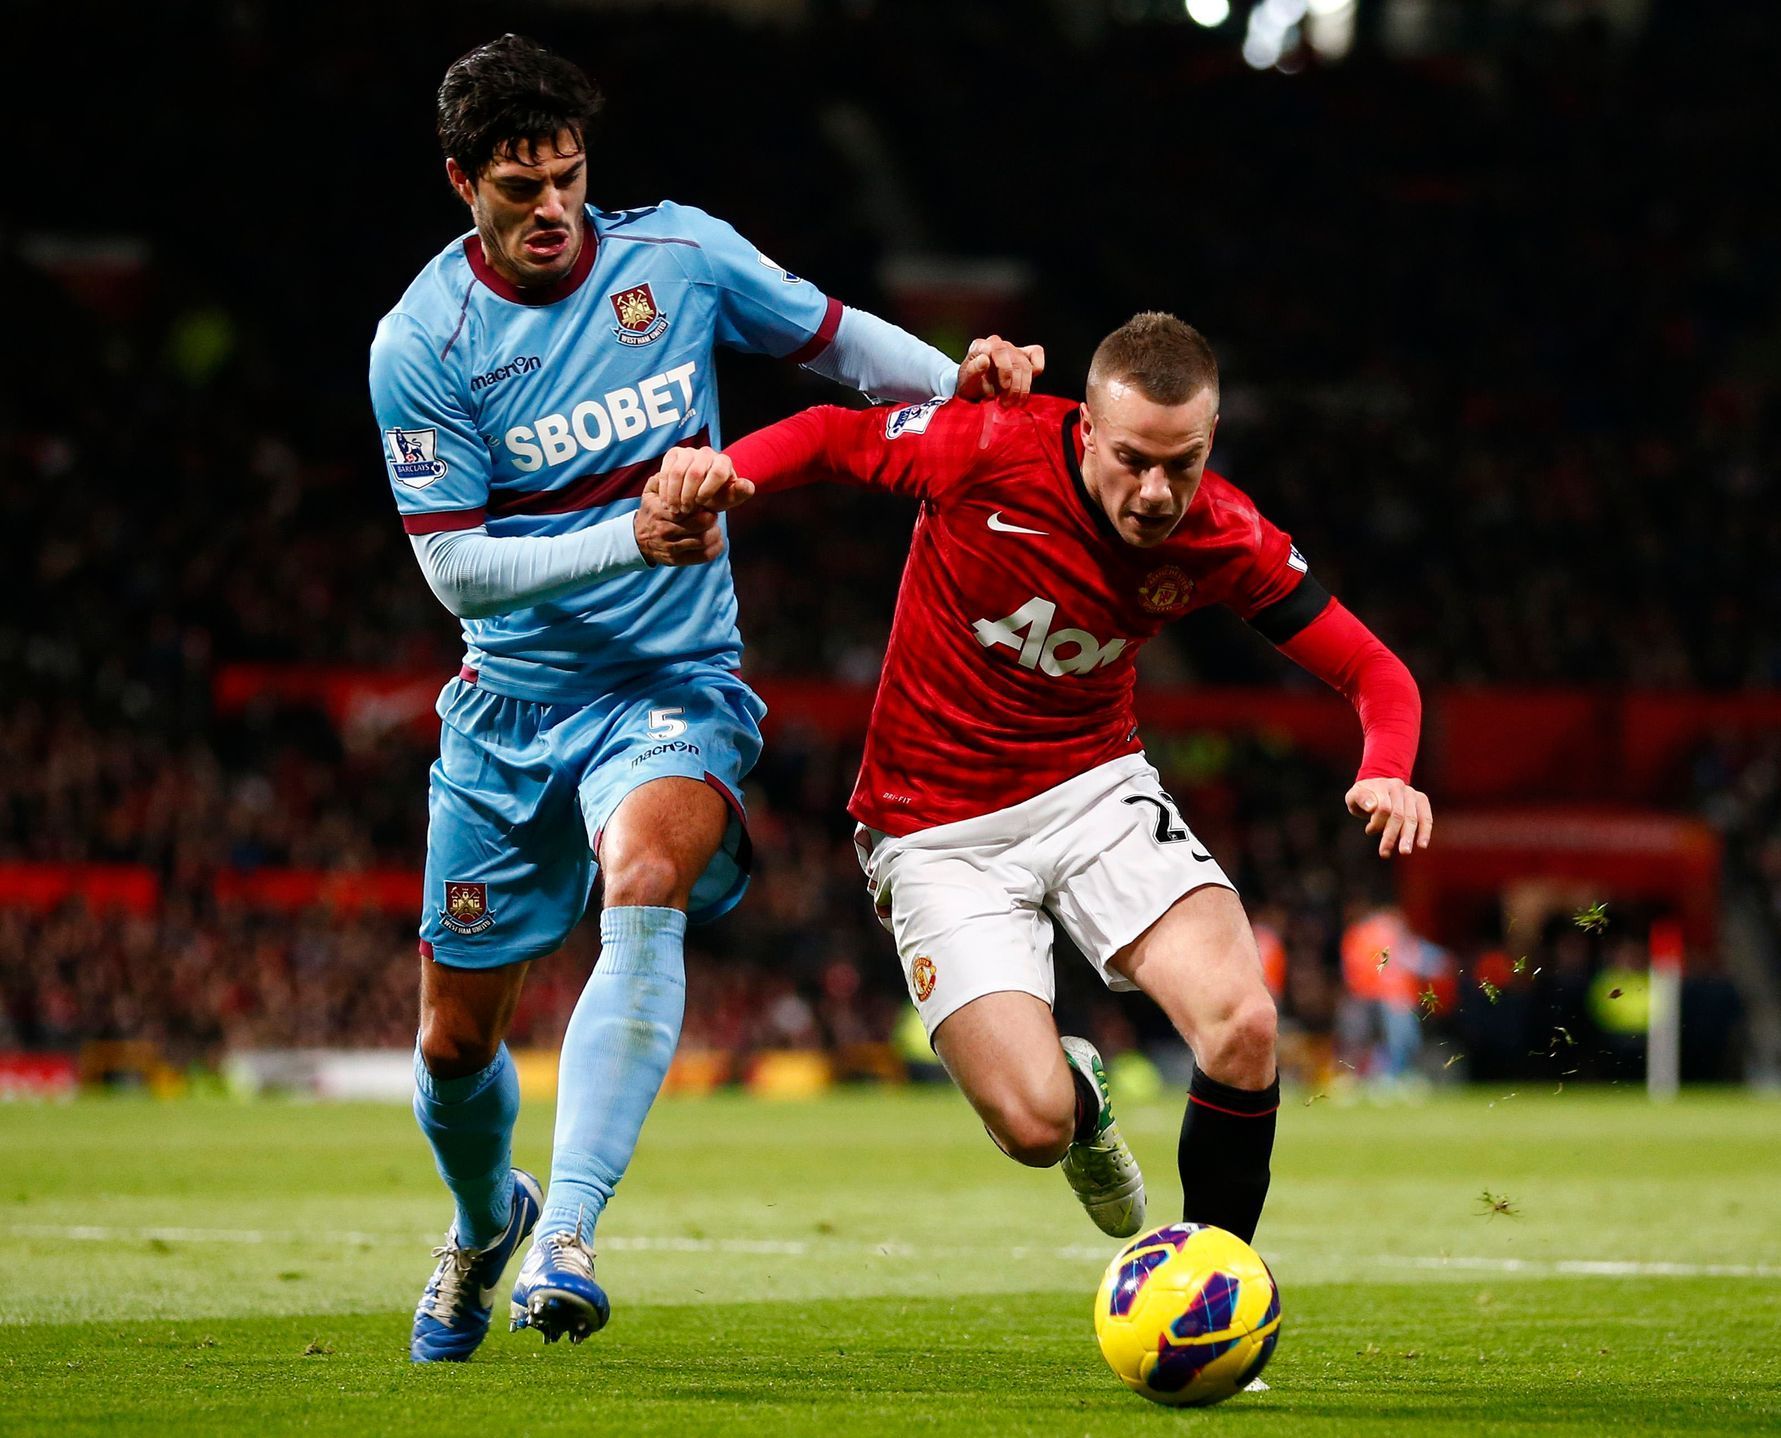 Manchester United - West Ham United (Cleverly vs Tomkins)